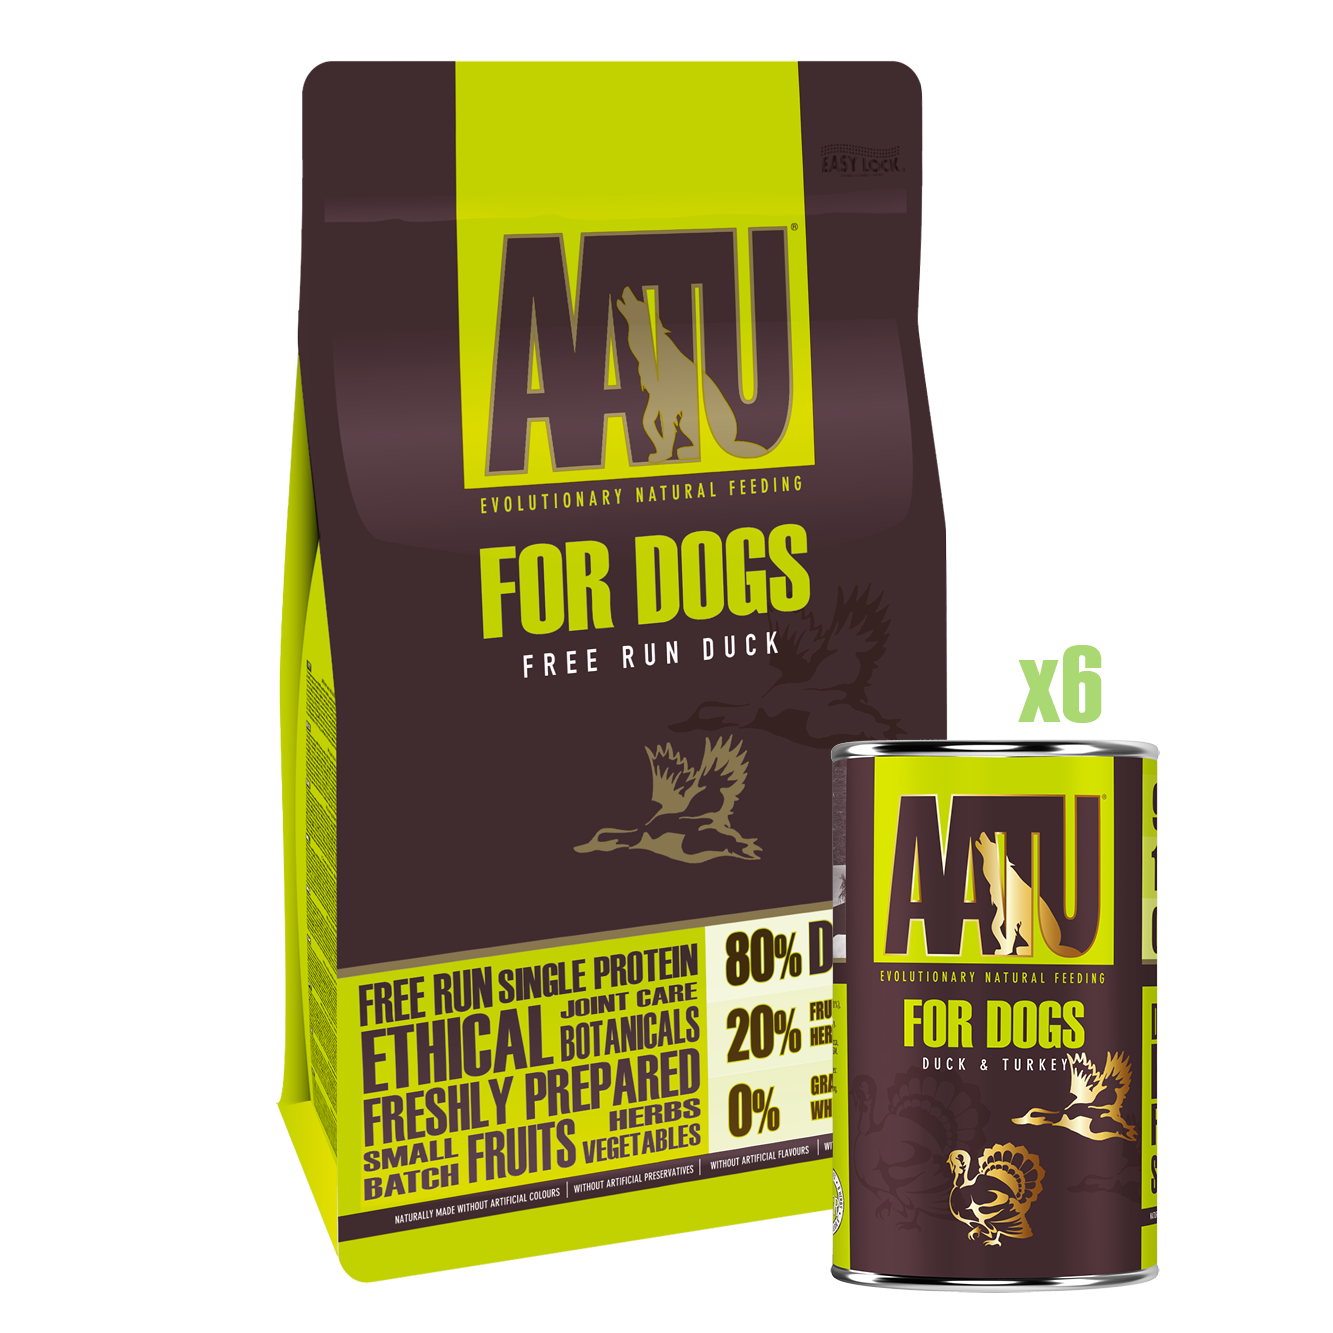 AATU for dogs free run duck bundle wet and dry